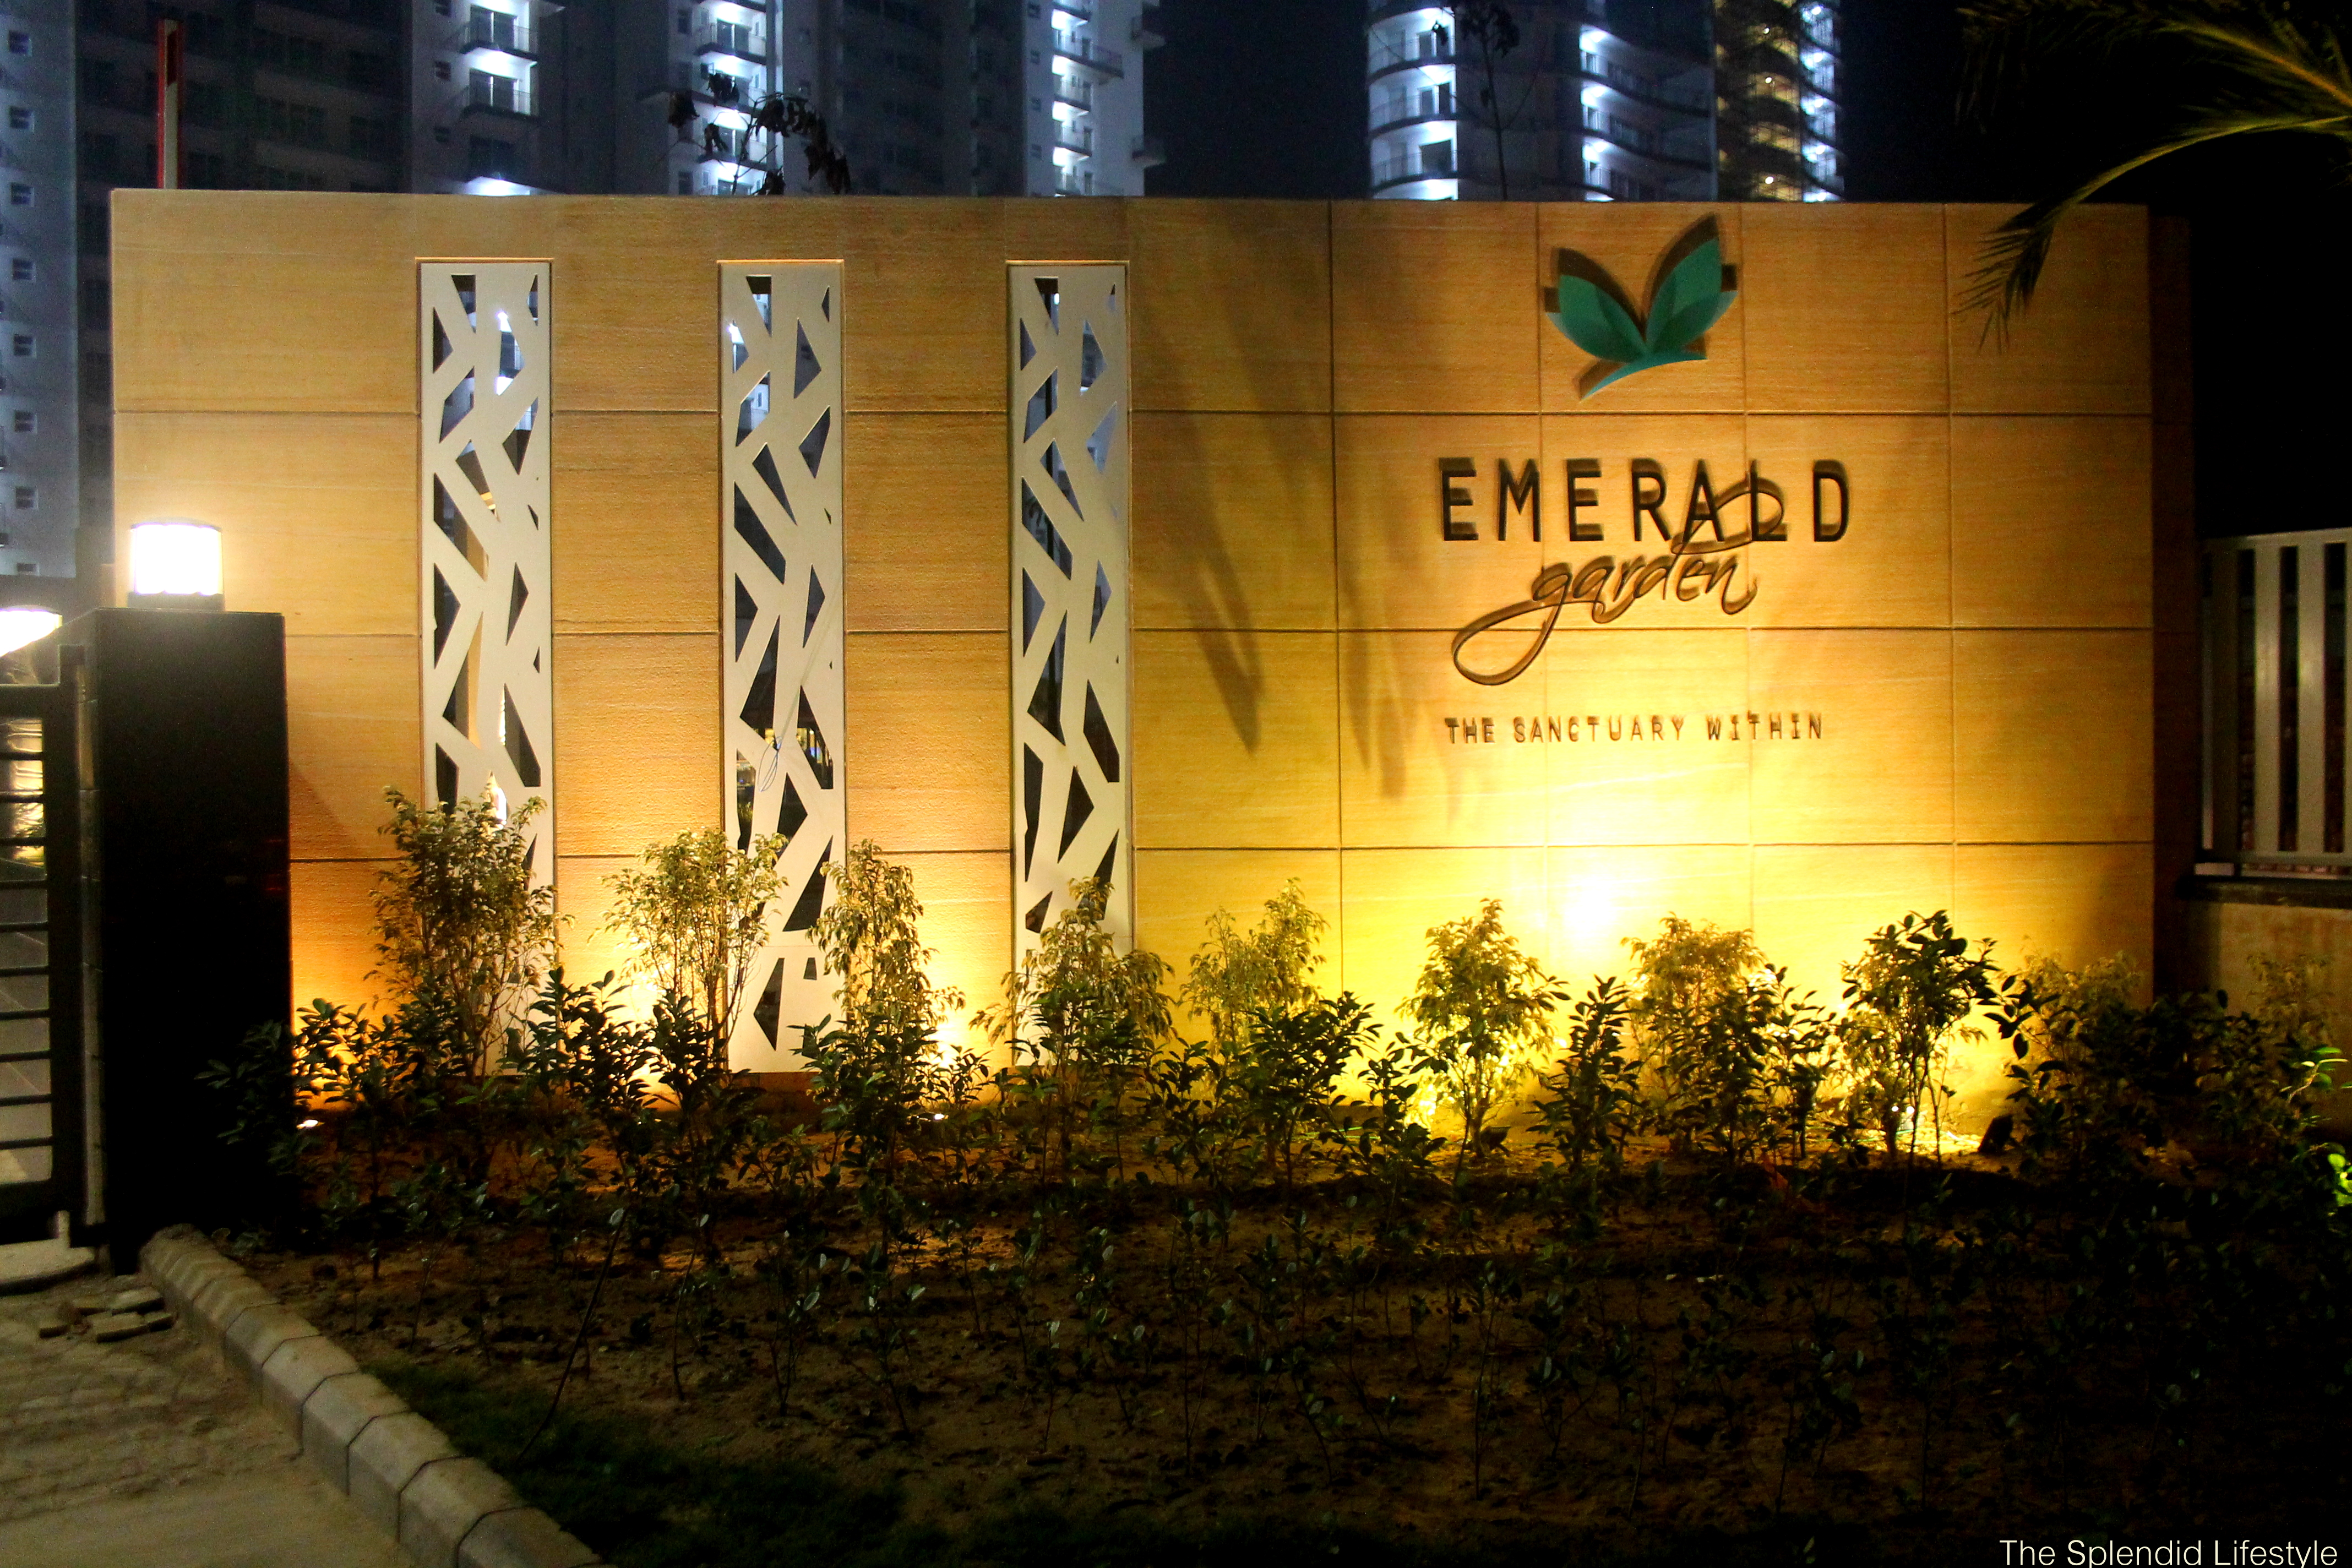 The Emerald Garden Kanpur-The Sanctuary Within